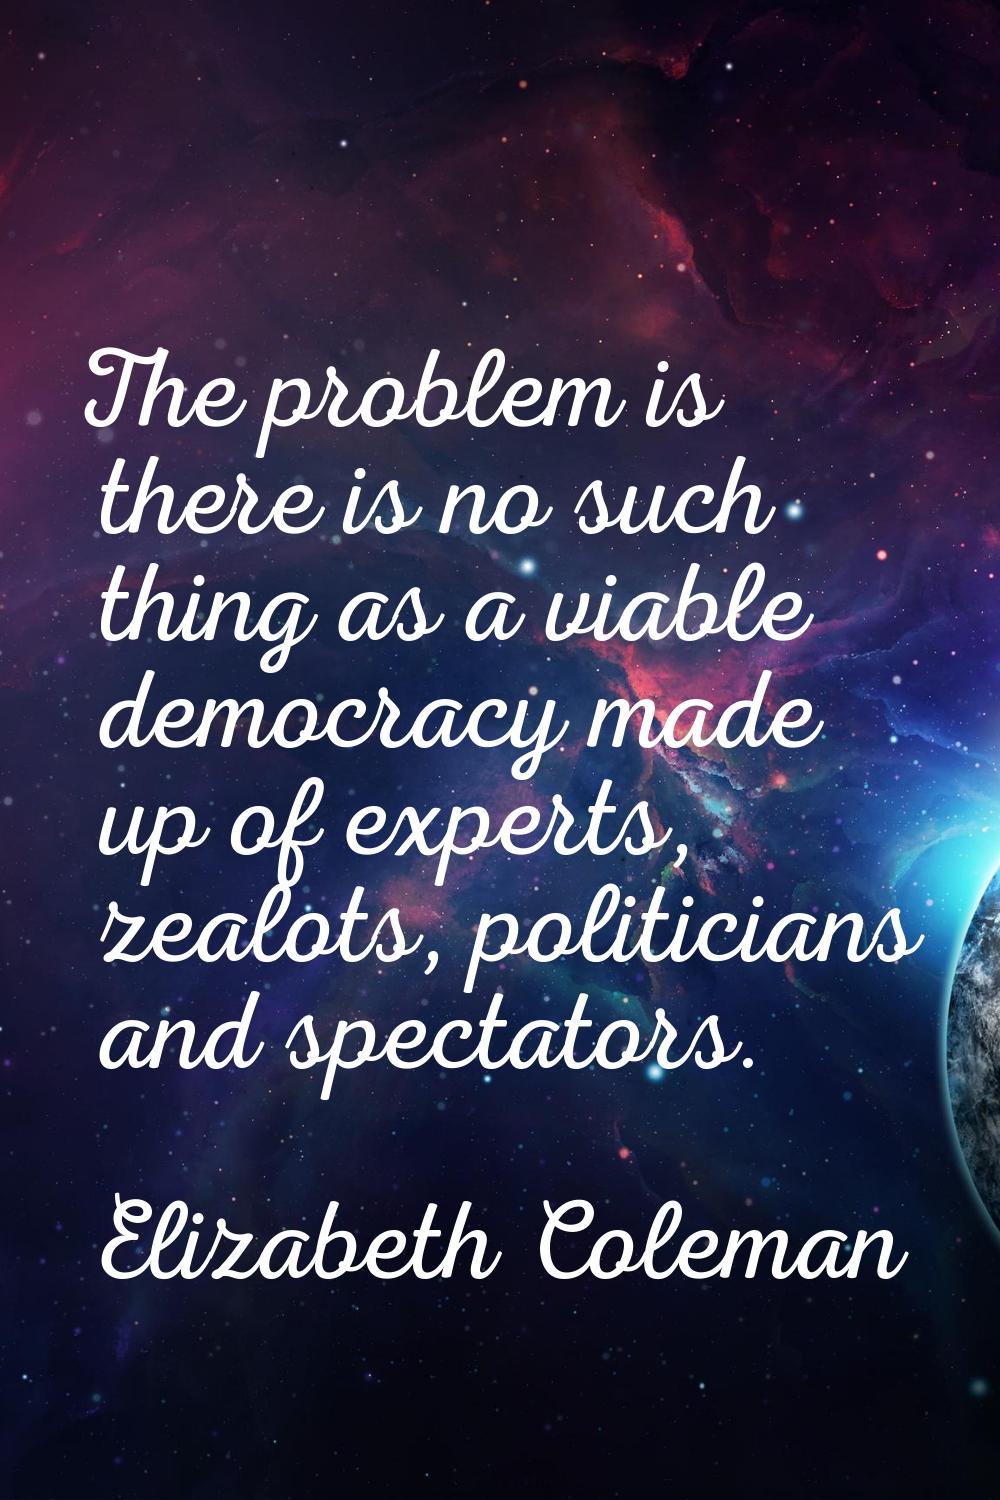 The problem is there is no such thing as a viable democracy made up of experts, zealots, politician